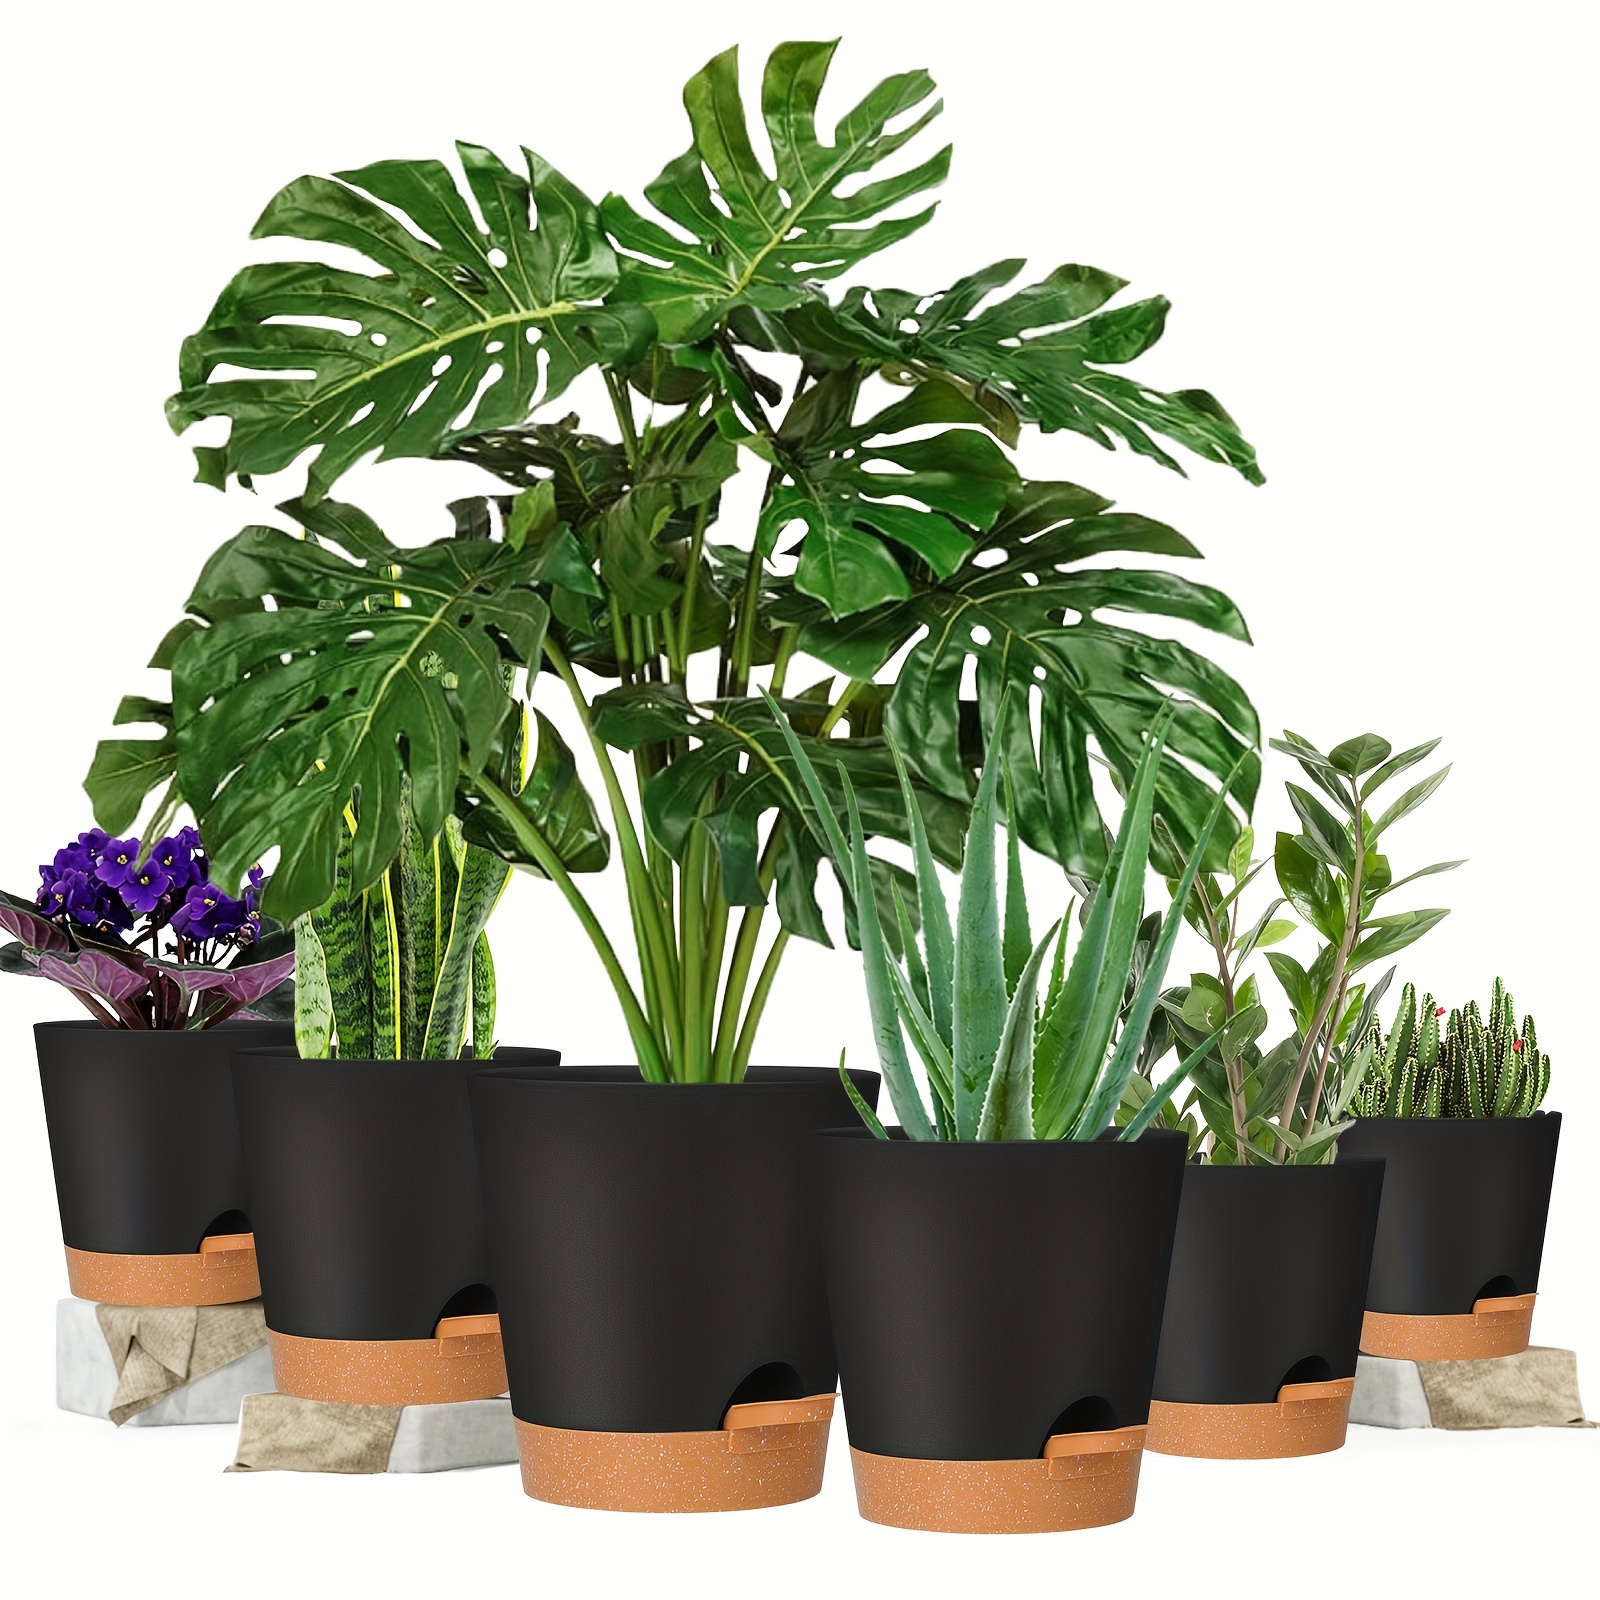 HEMOPLT Pack of 6 Self Watering Planters, 5/6.8 Inch Simulated Metallic  Plant Pots, Thickness of 0.15 Sturdy Flower Pots, Ideal Birthday  (Champagne Gold, Black Silver, Rose Gold) Plastic 